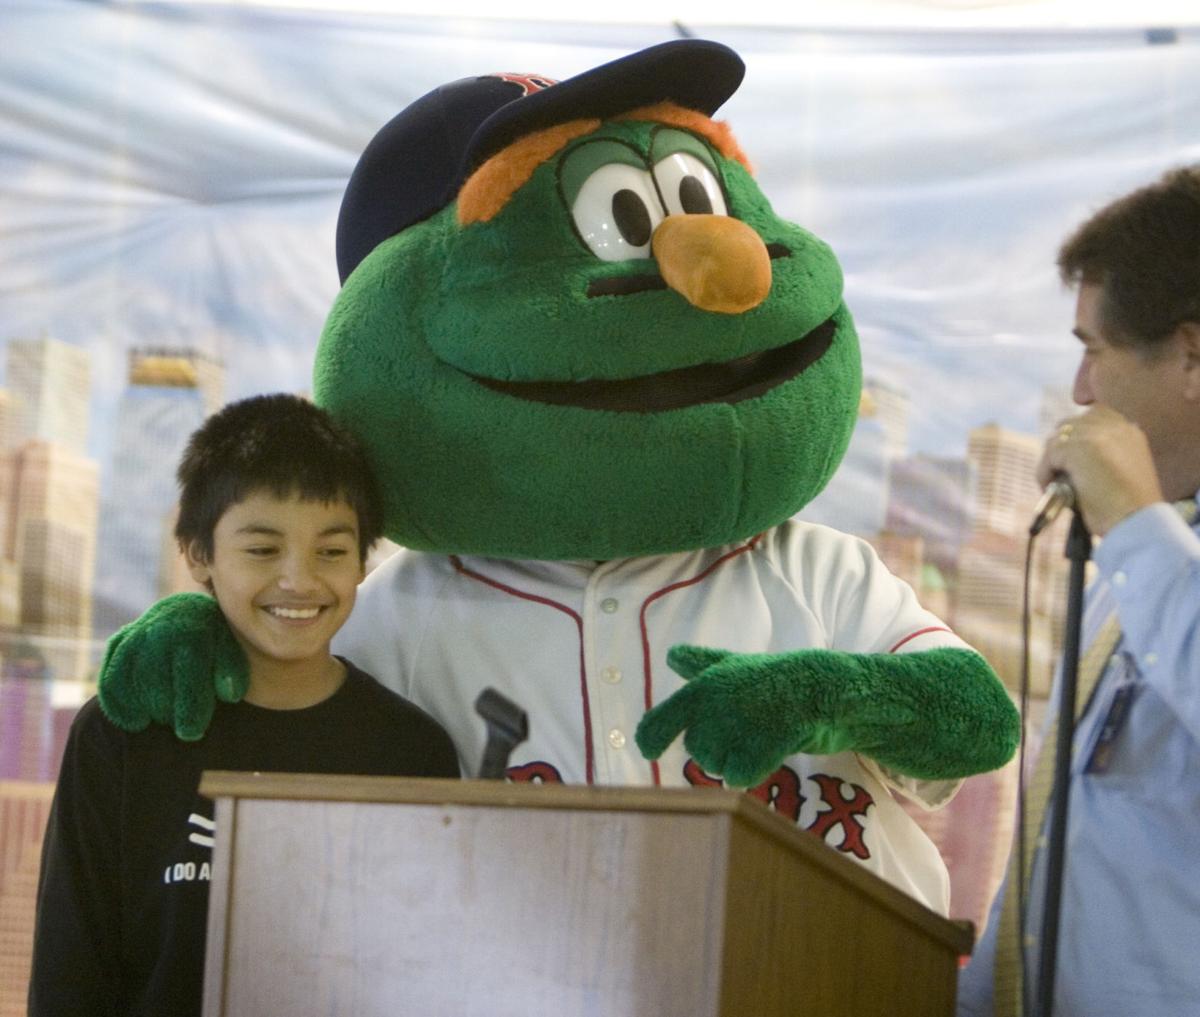 Wally the Green Monster Stolen From Fenway Park 